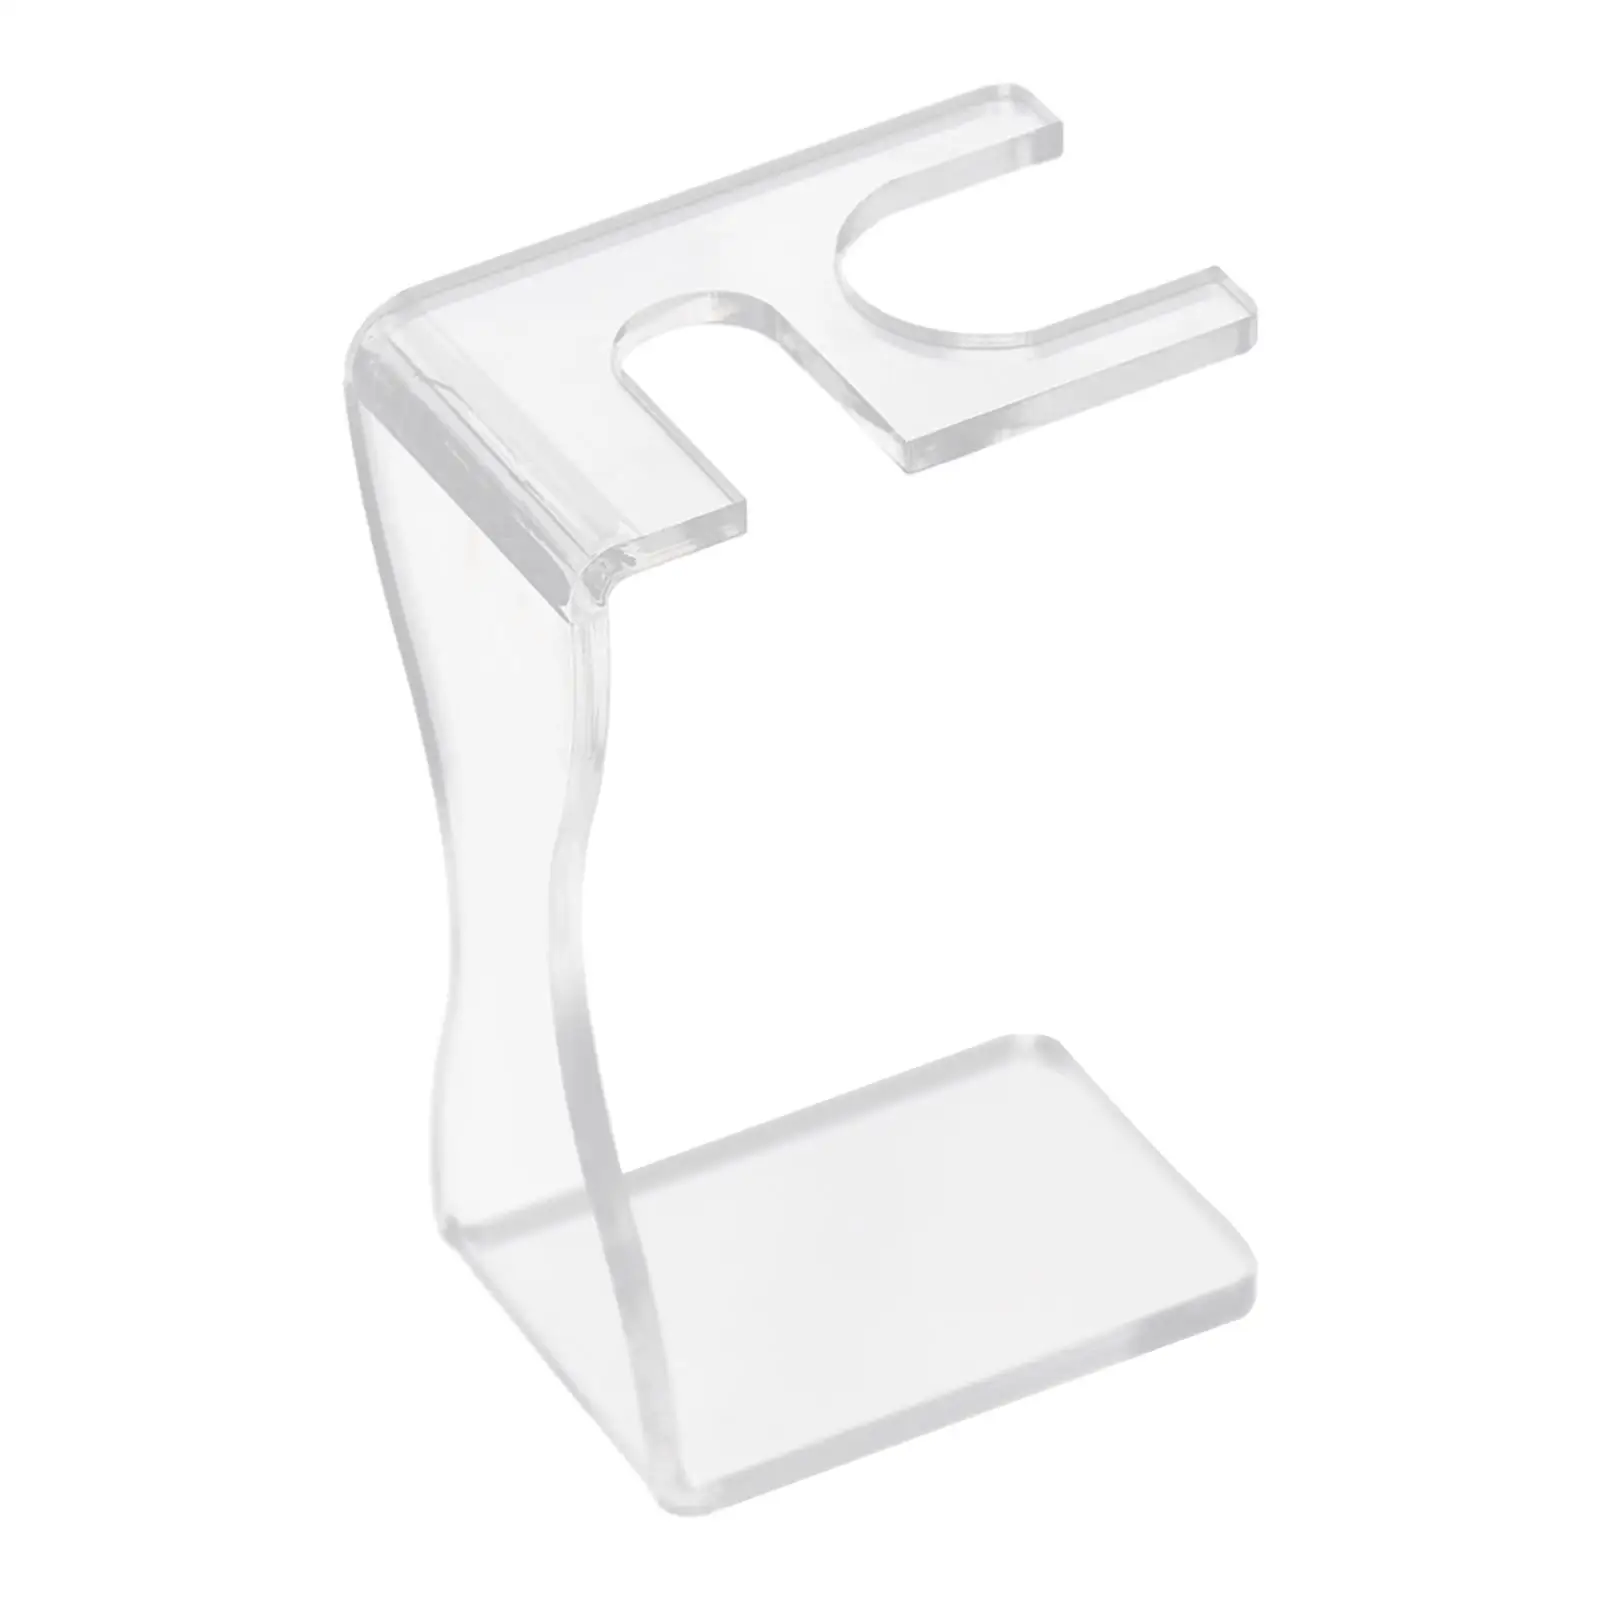 Manual Shaver Stand Holder Rack Acrylic Material Stable Bottom Sturdy Multipurpose Height 11.2cm Accessory for Boyfriend